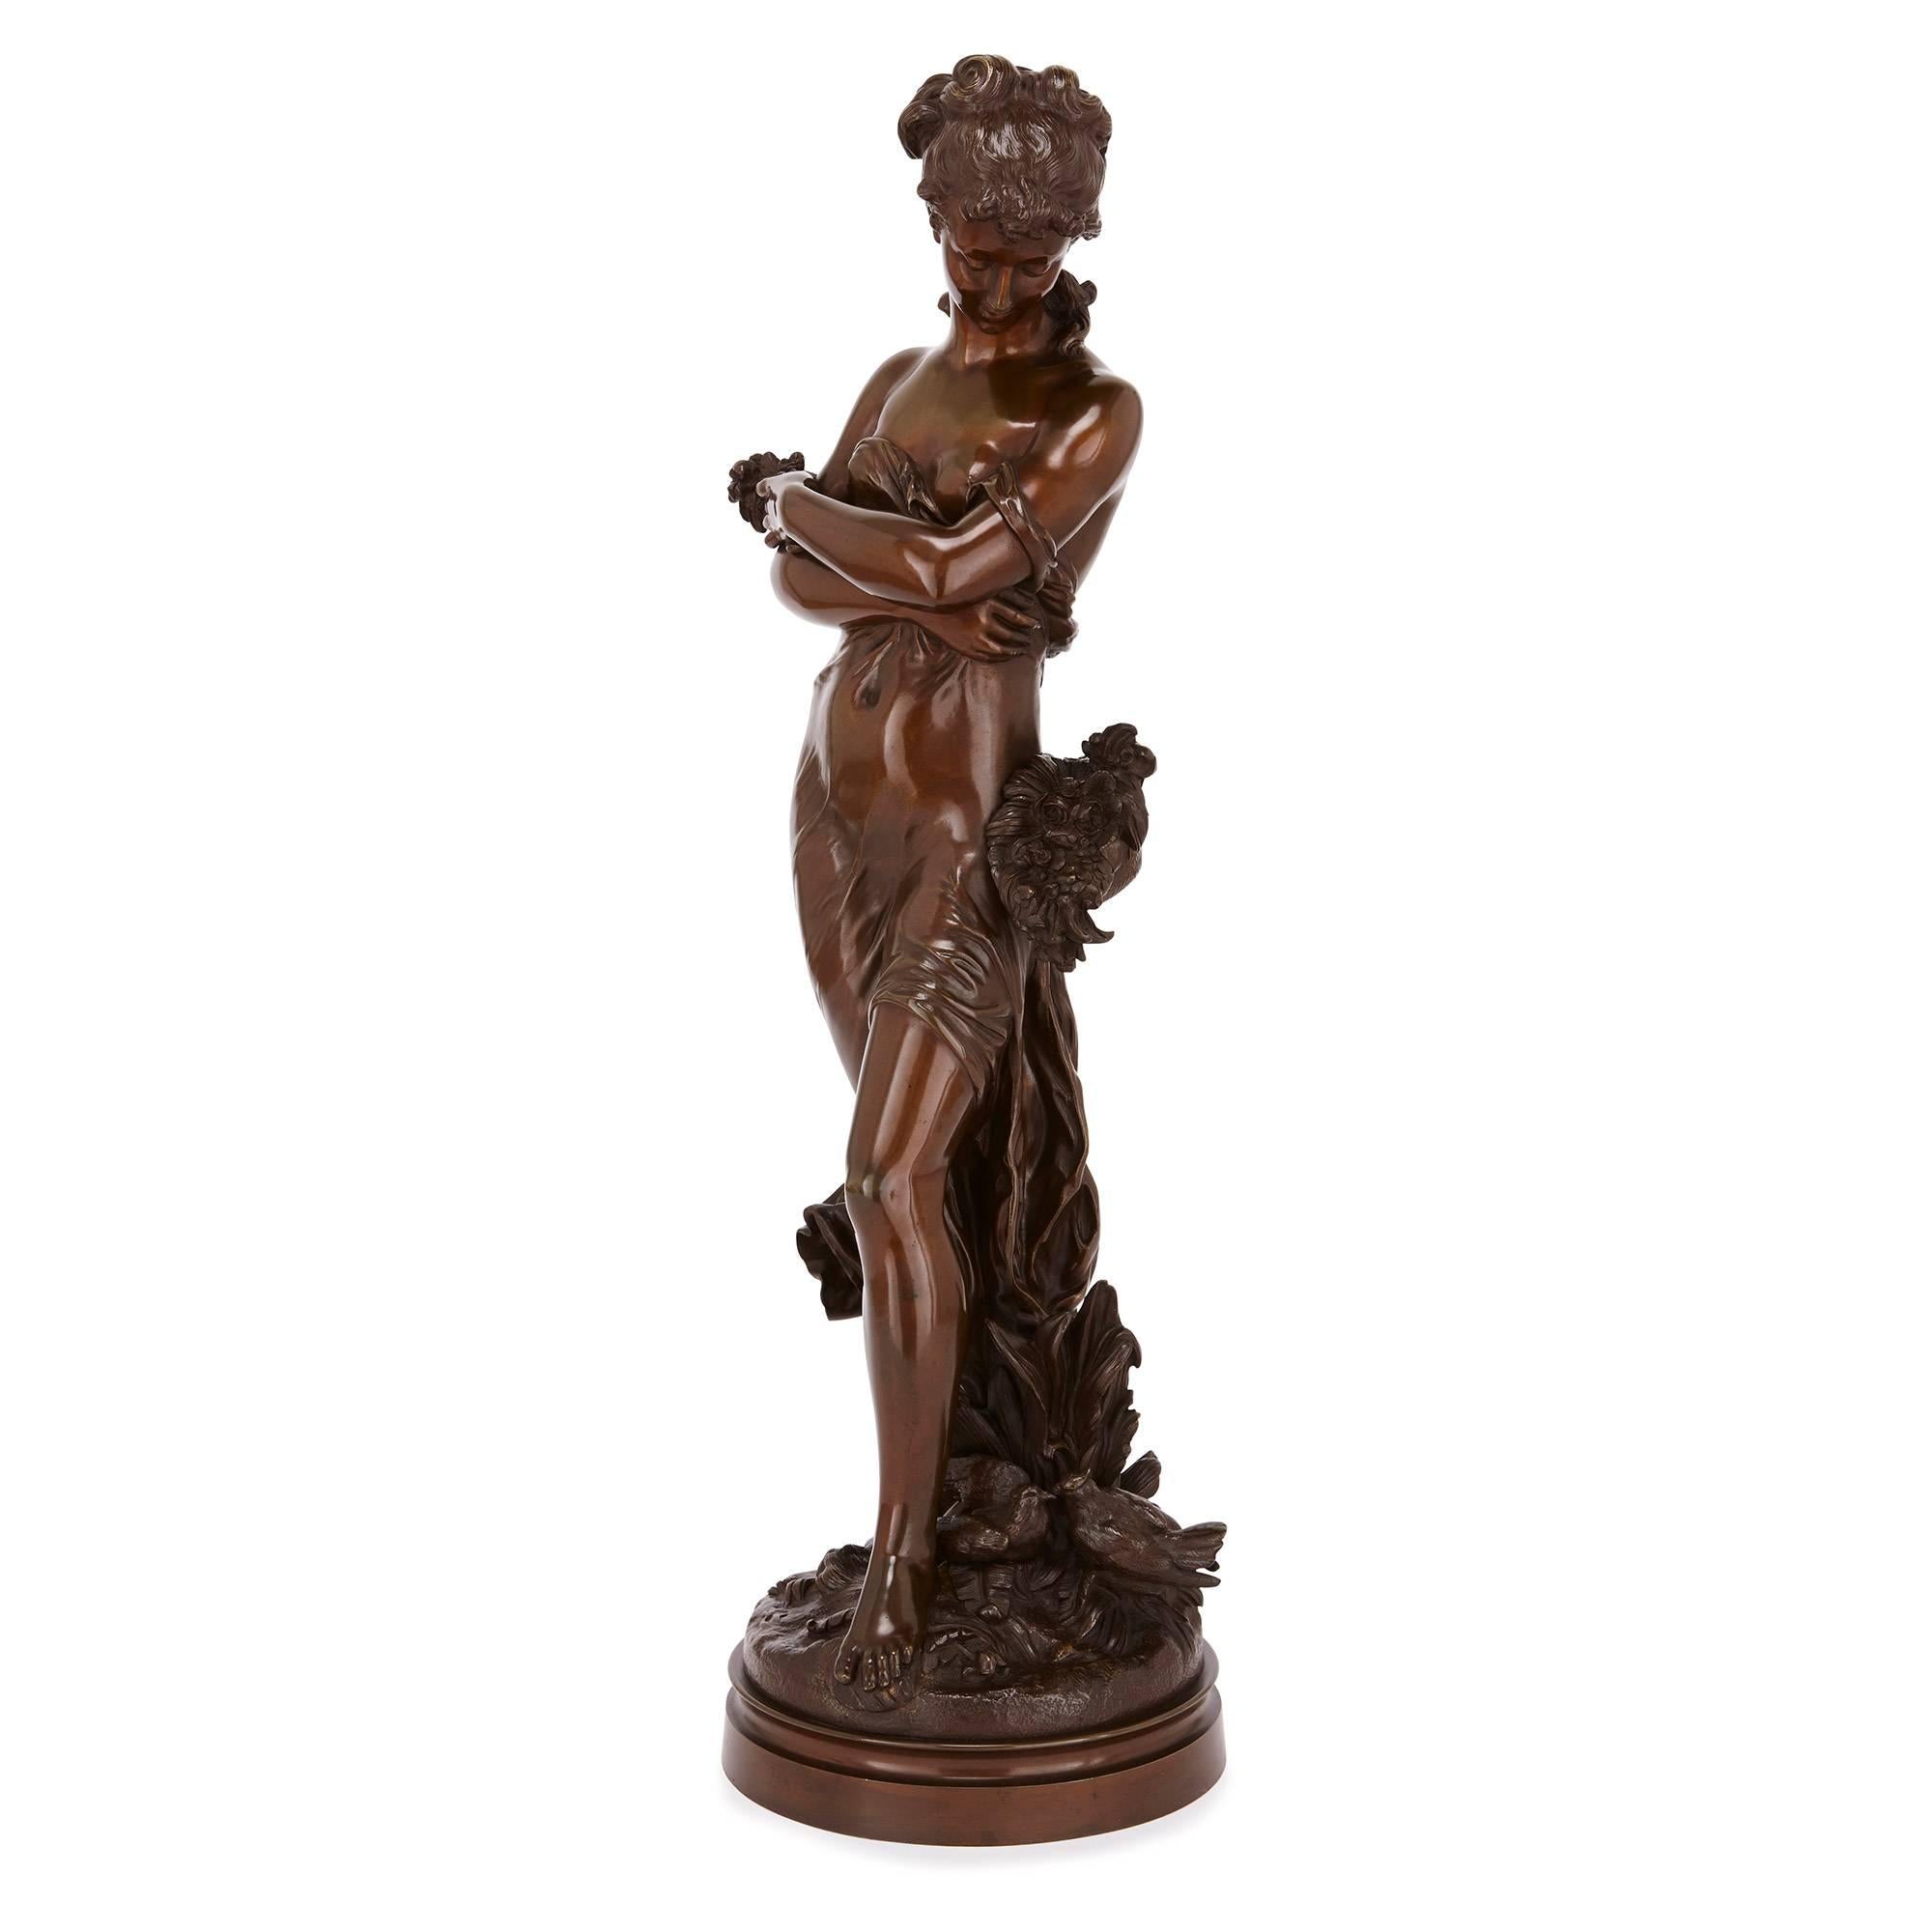 This alluring bronze depicts the full-length figure of a young lady who, swathed in draped clothing, looks downward toward a basket of flowers hung about her waist. The circular base upon which she stands is naturalistically cast as a forest